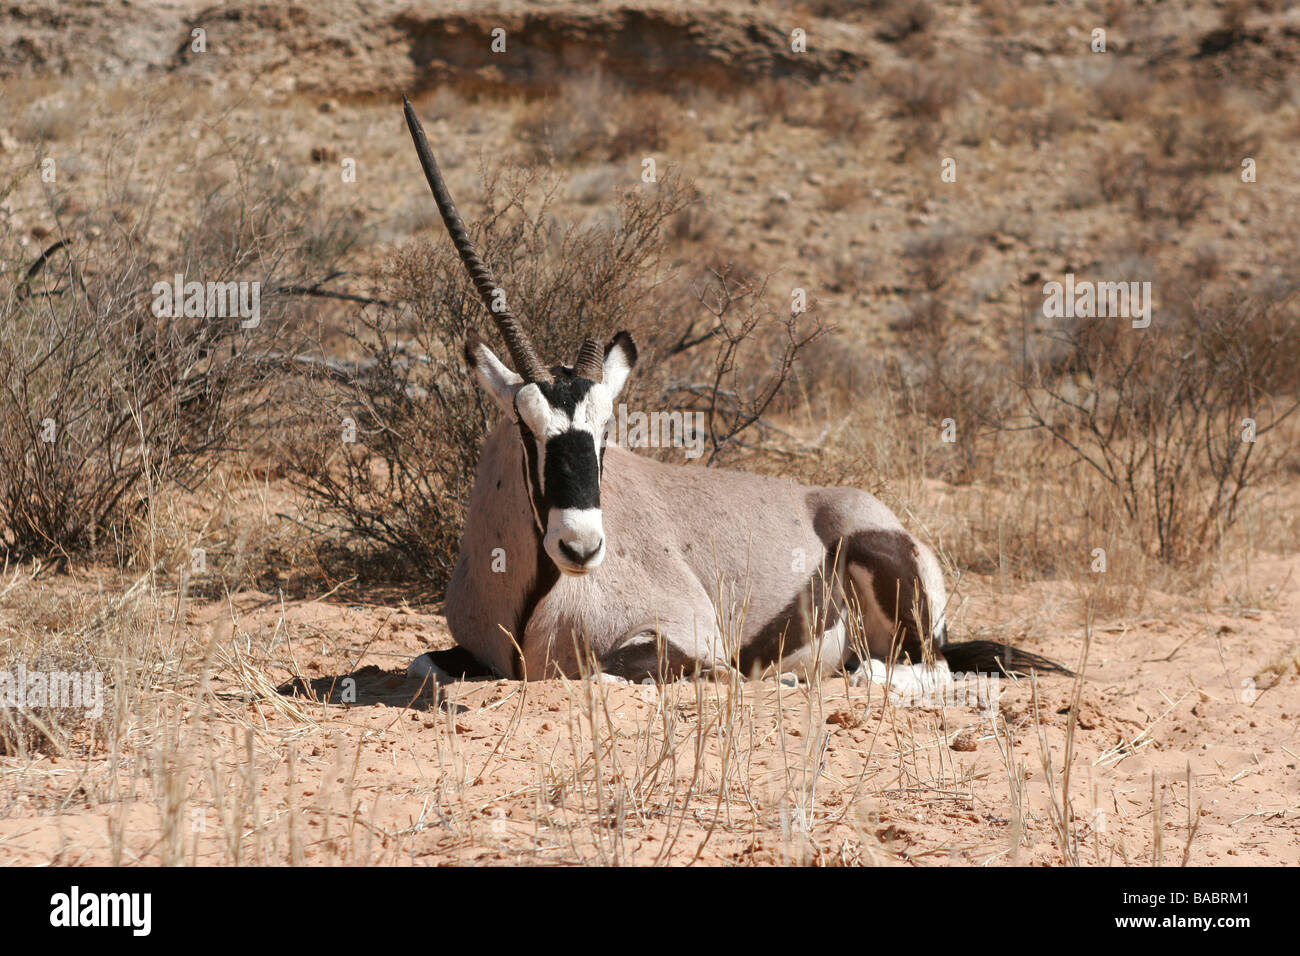 A Gemsbok (Oryx Gazelle) with one horn missing lies on the ground in the Kgalagadi Transfrontier Park in South Africa. Stock Photo